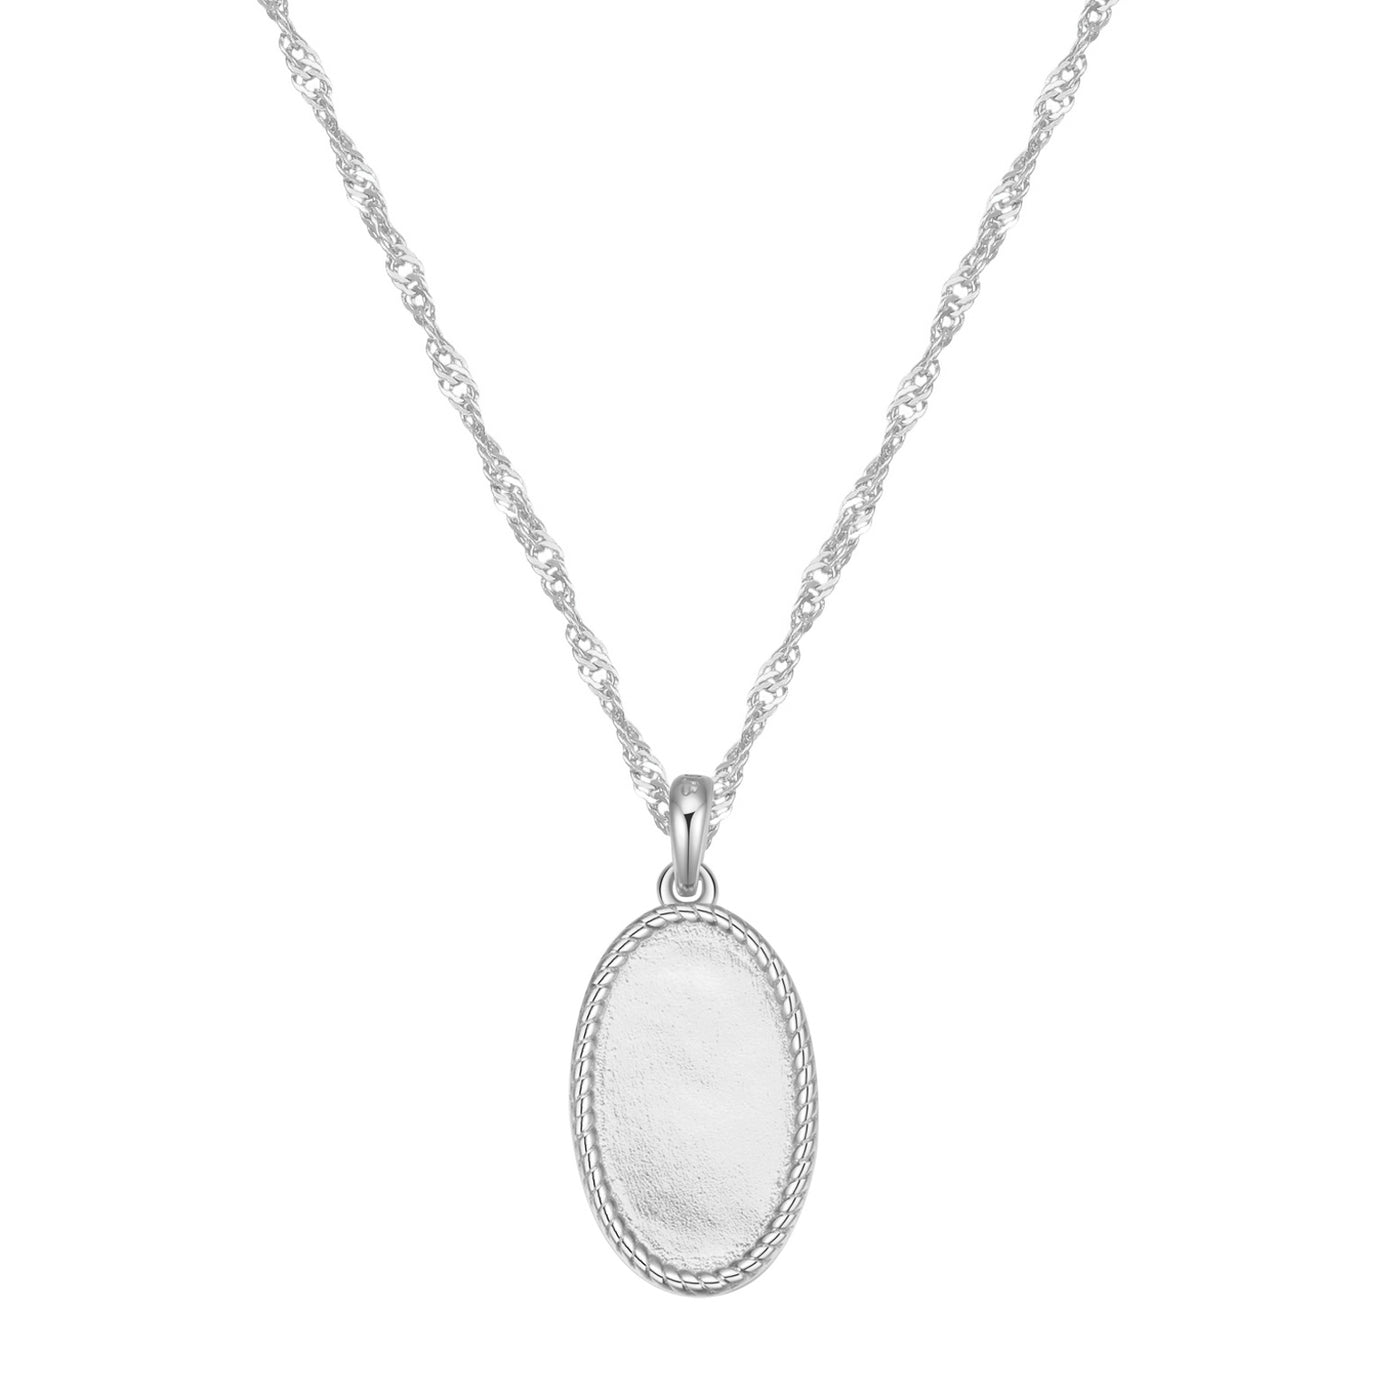 Oval Rope Pendant Necklace Sterling Silver